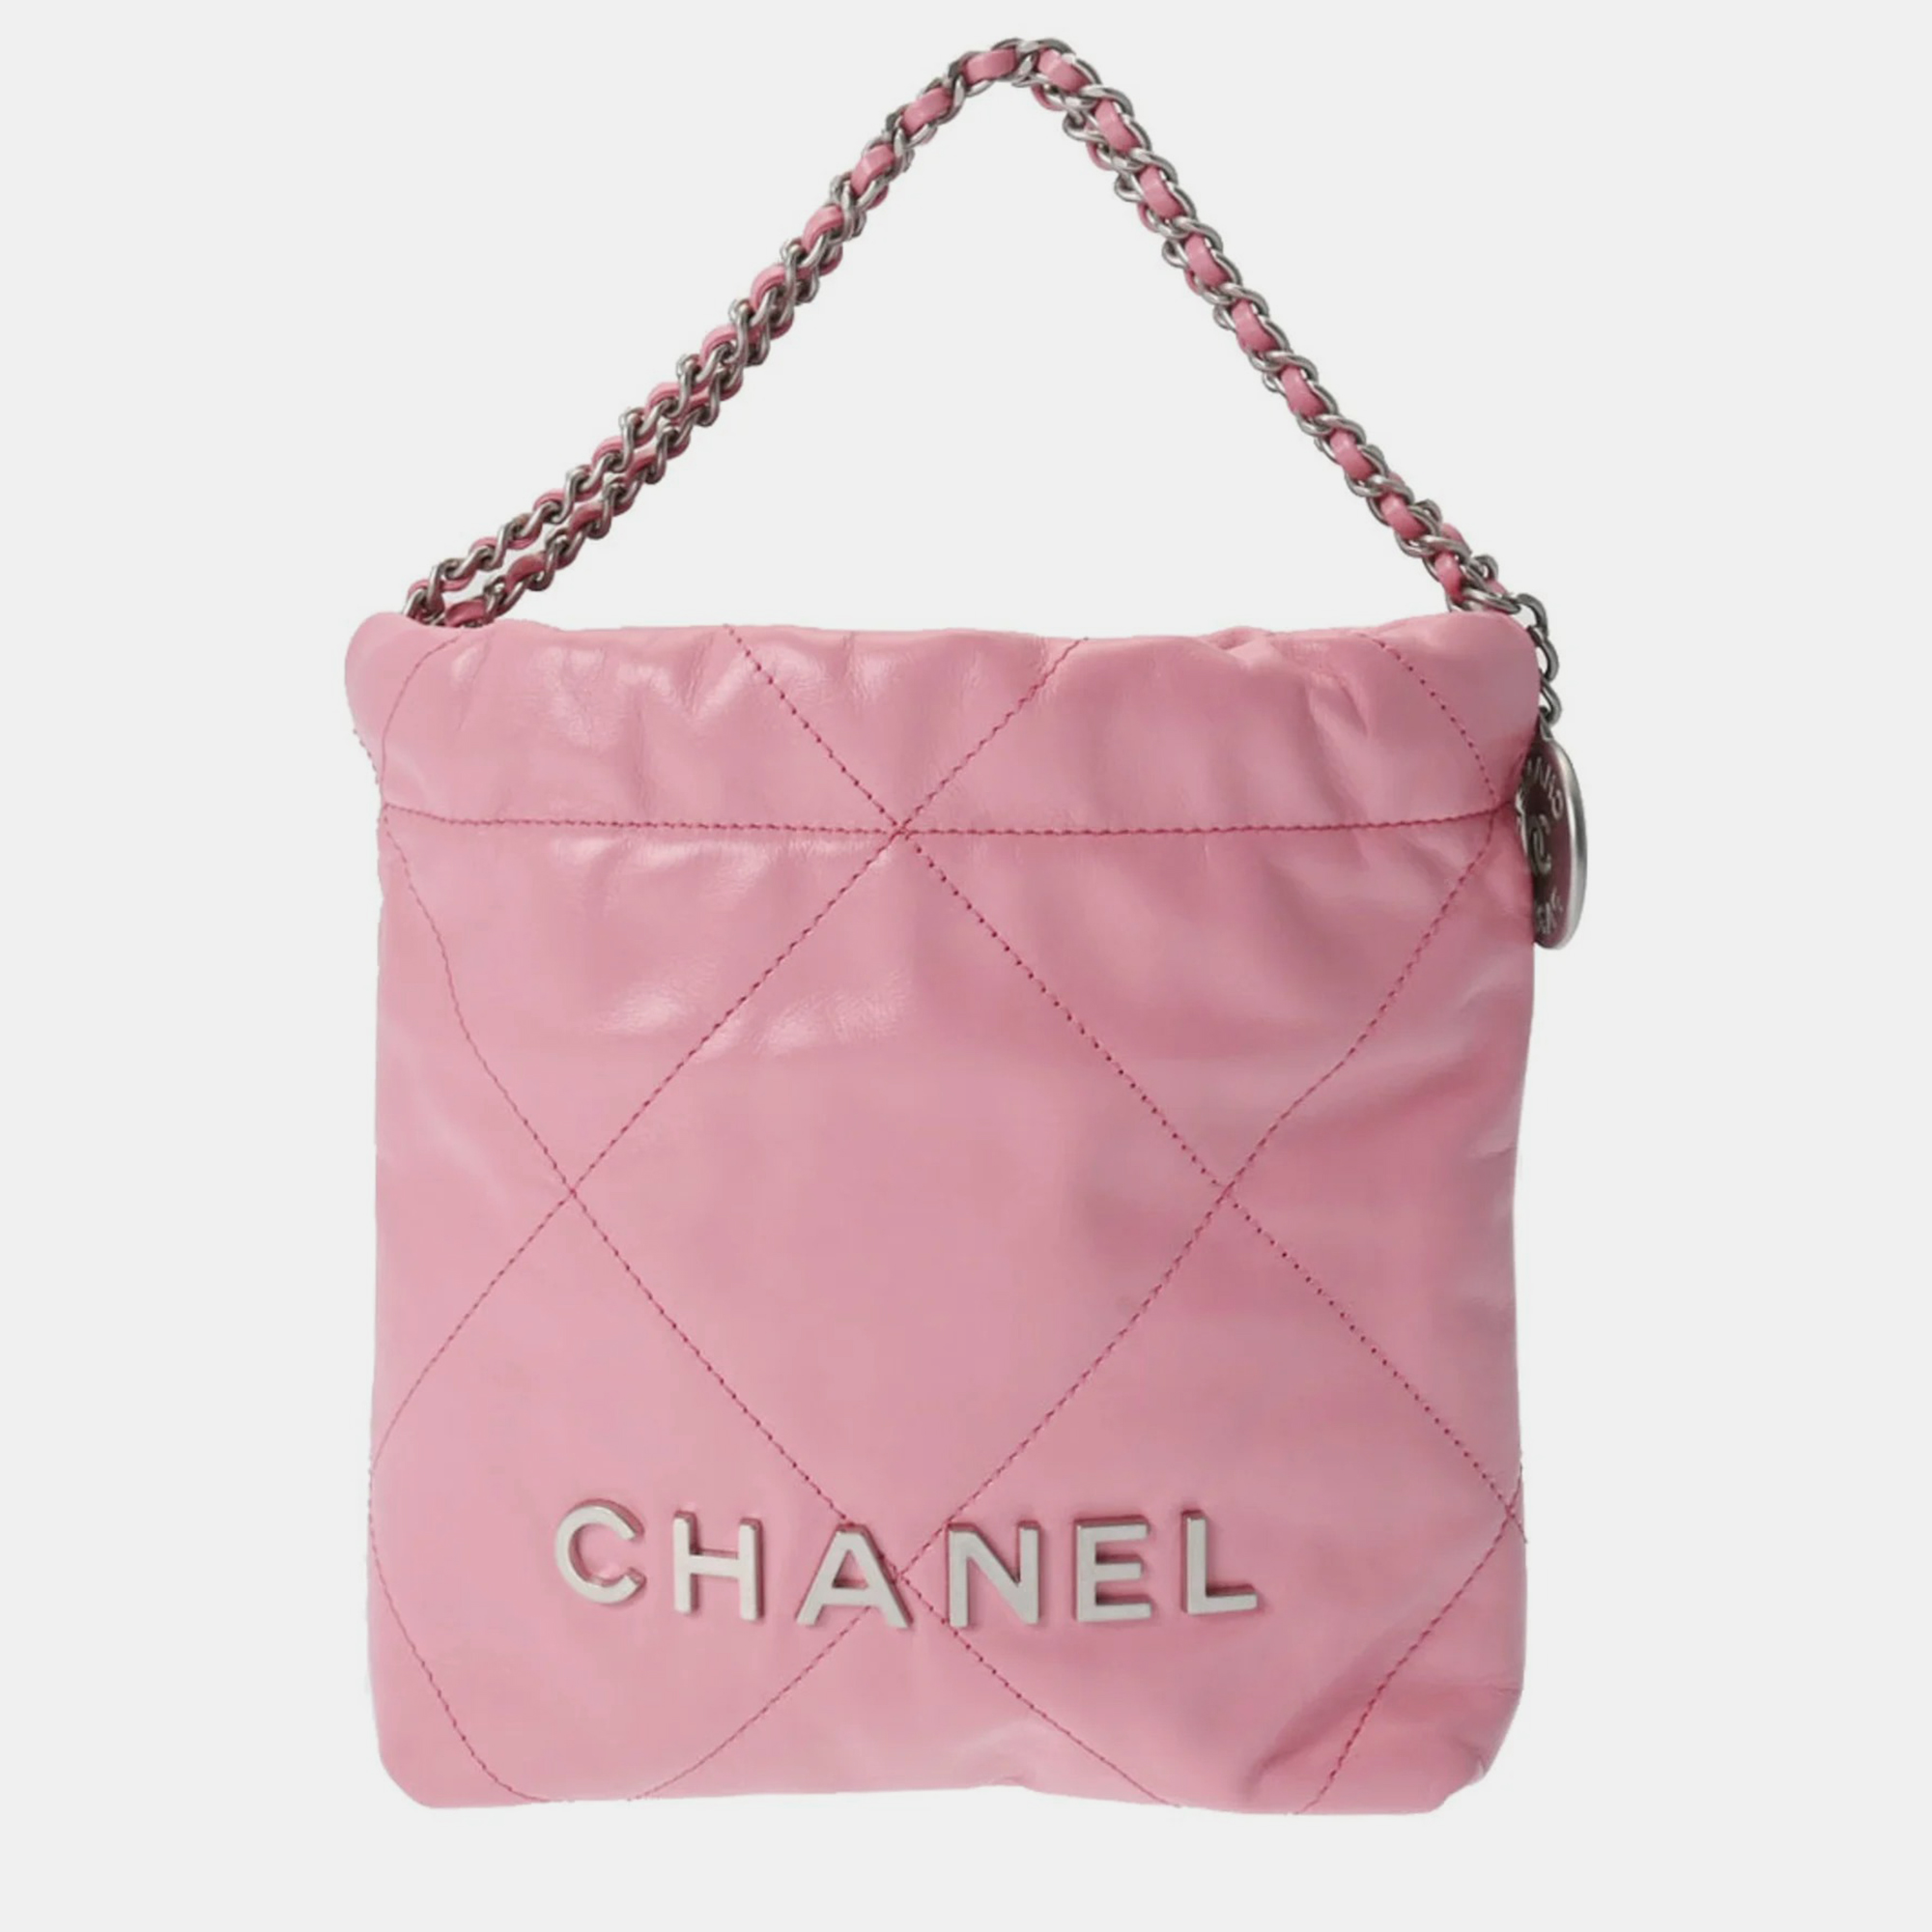 Pre-owned Chanel Pink Leather Mini 22 Hobo Bag